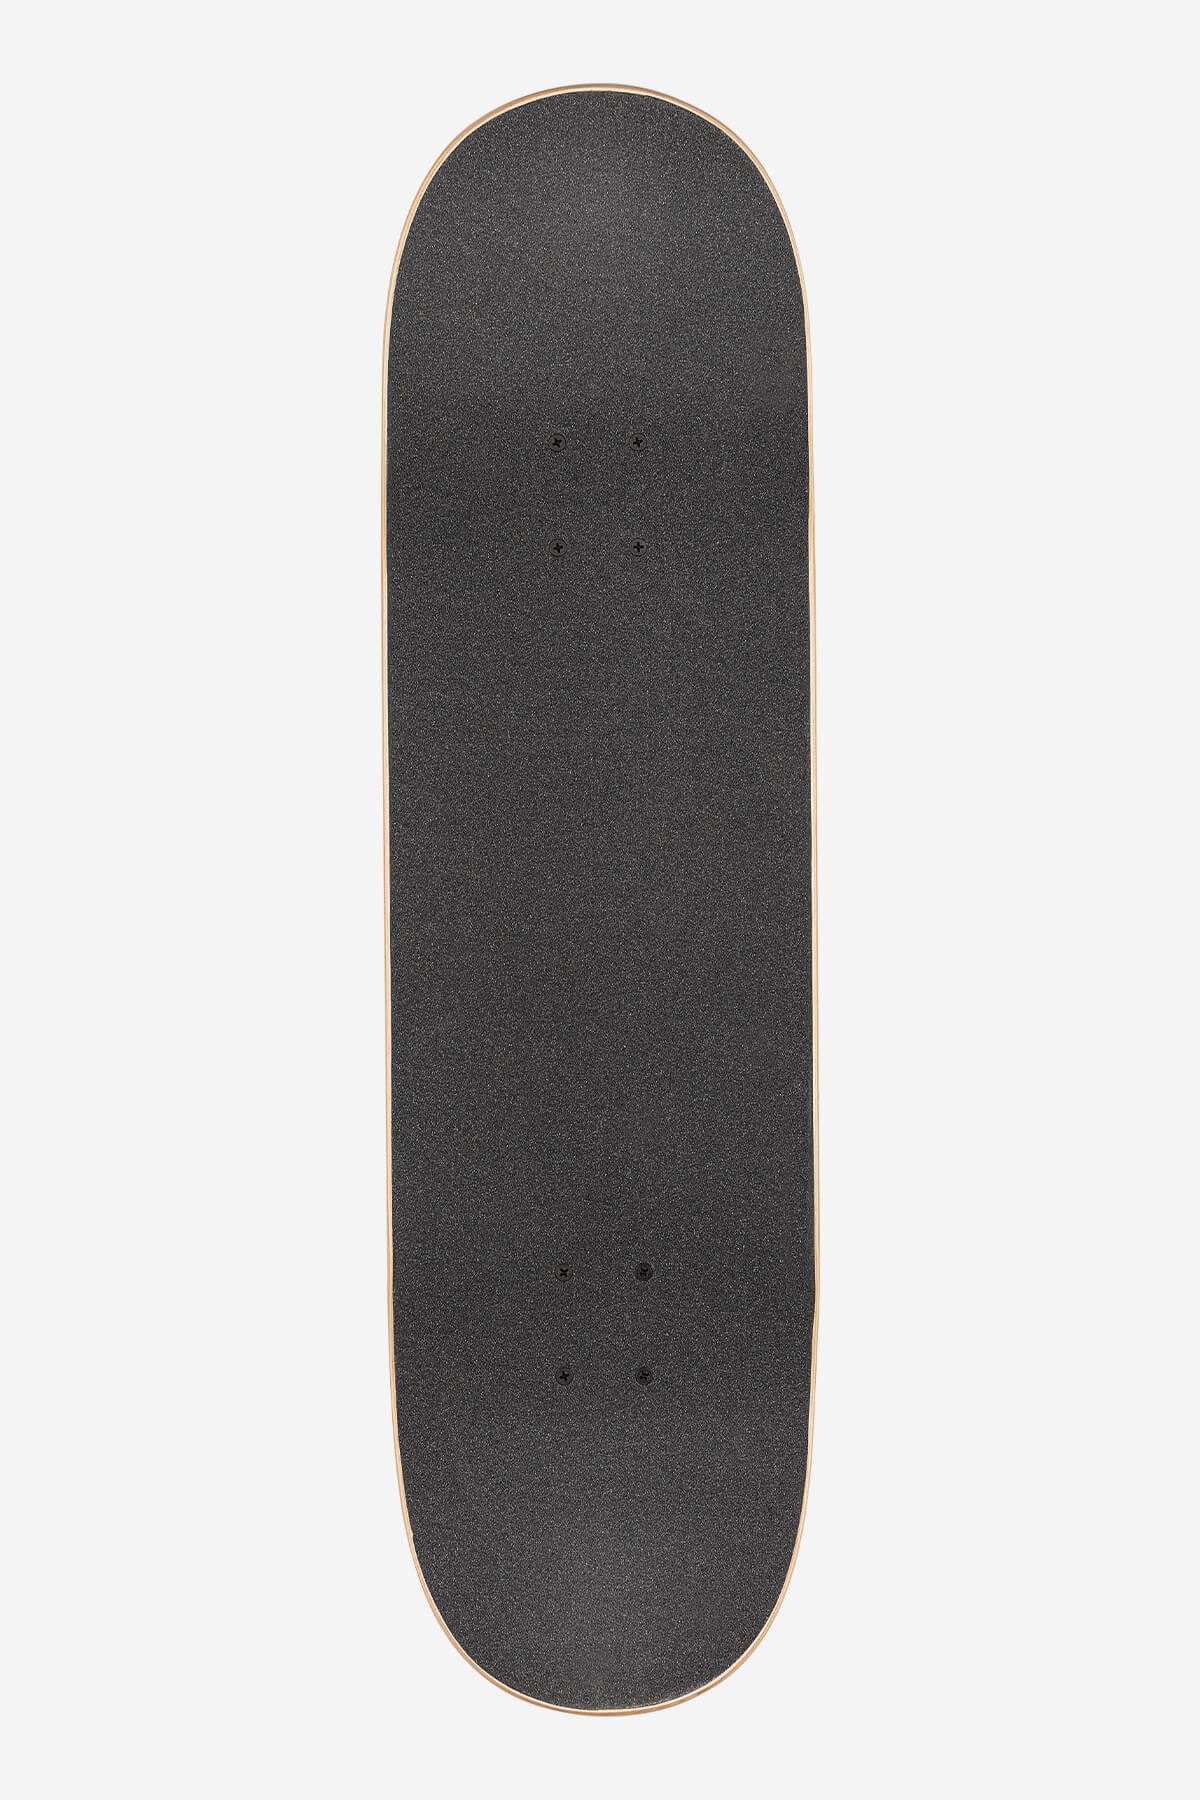 g1 stack lone palm 8.0" complet skateboard